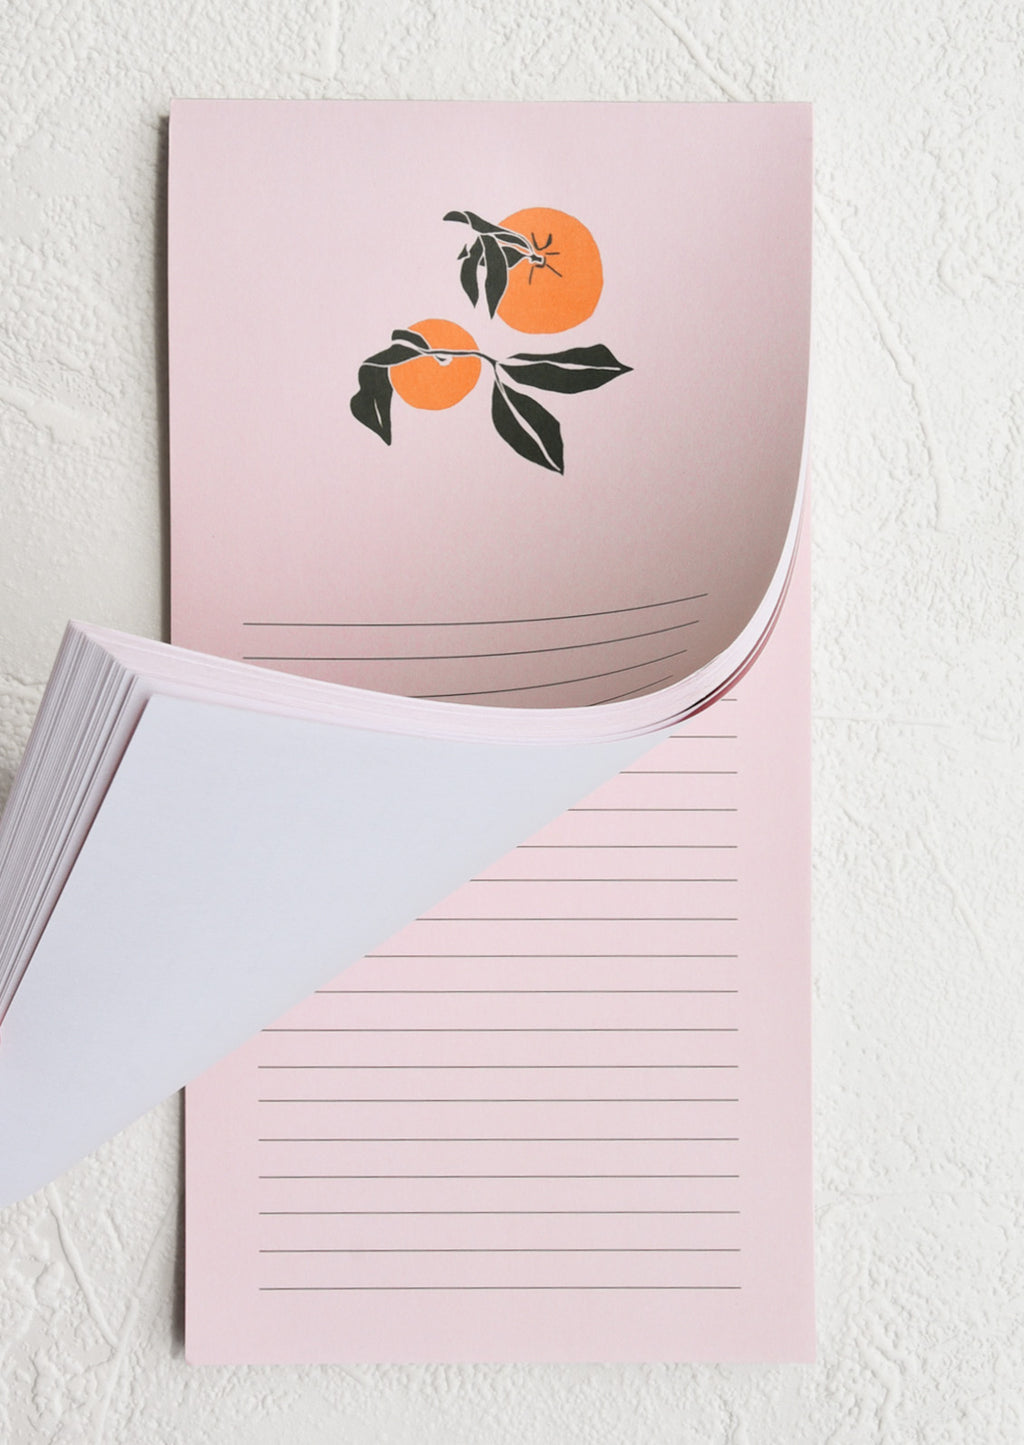 2: A light pink lined notepad with two oranges at the top